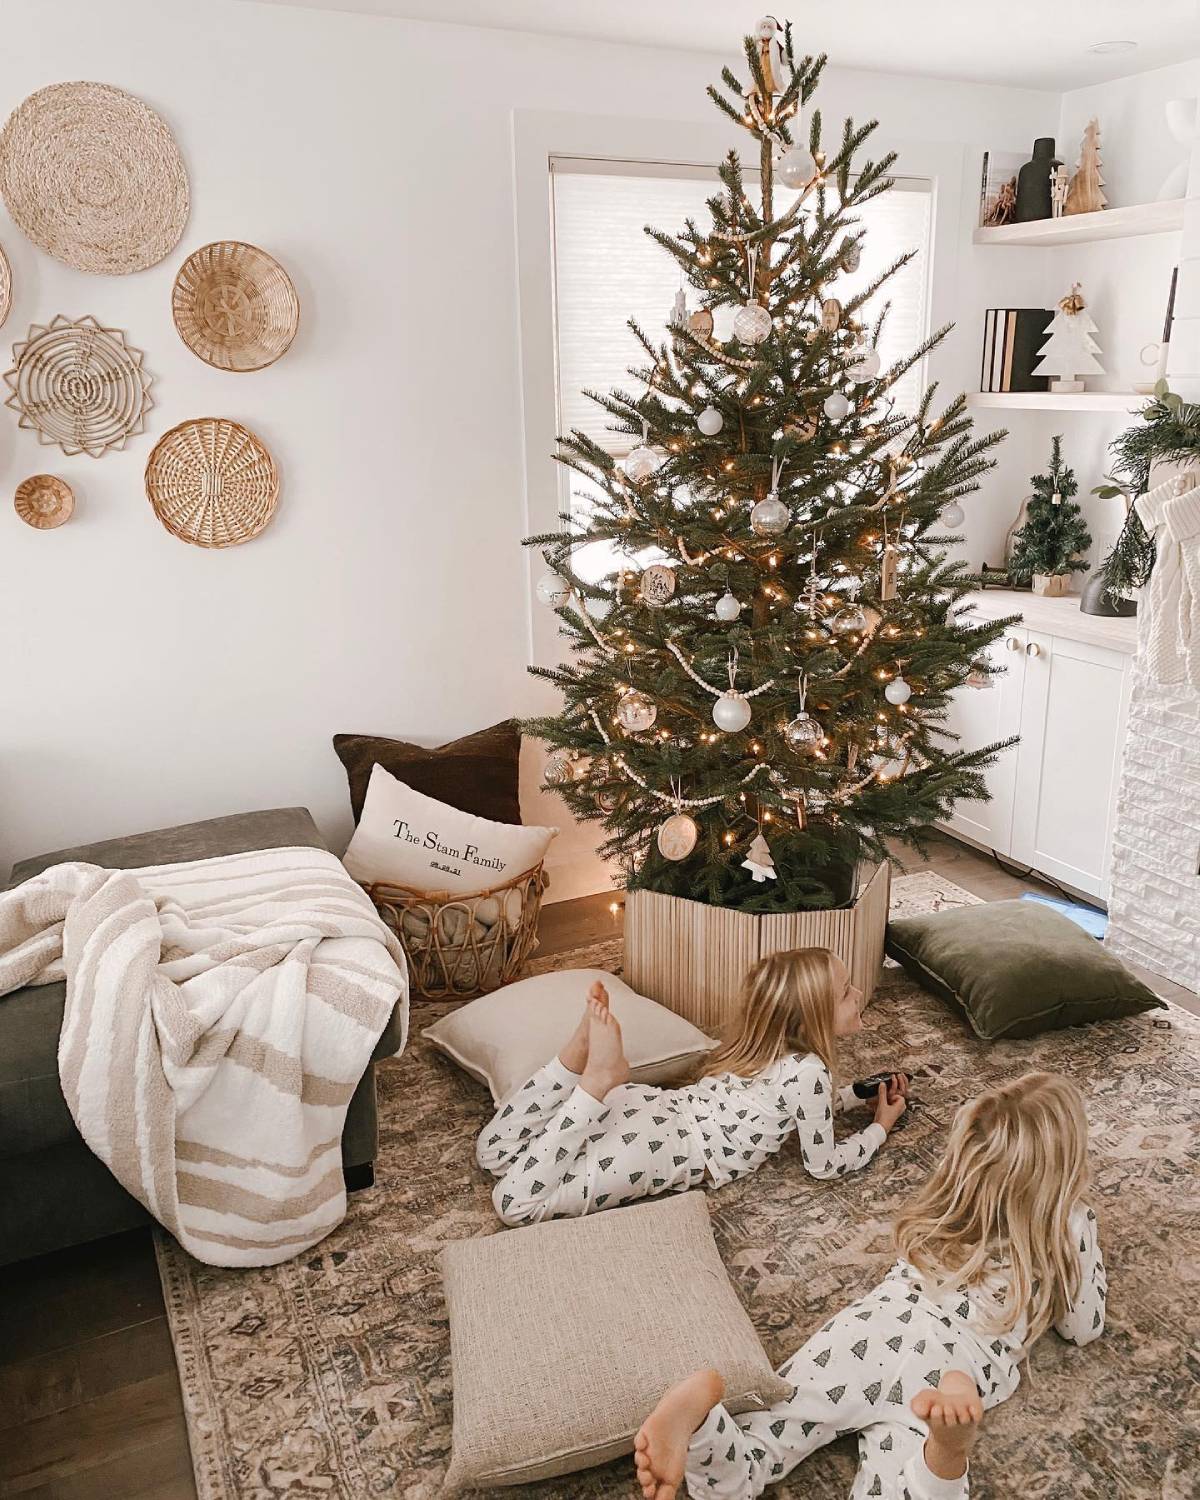 Christmas tree in living room. Christmas tree at home. Cozy by the Christmas tree. Laying on floor next to Christmas tree. Cozy pillows and blankets at Christmastime.